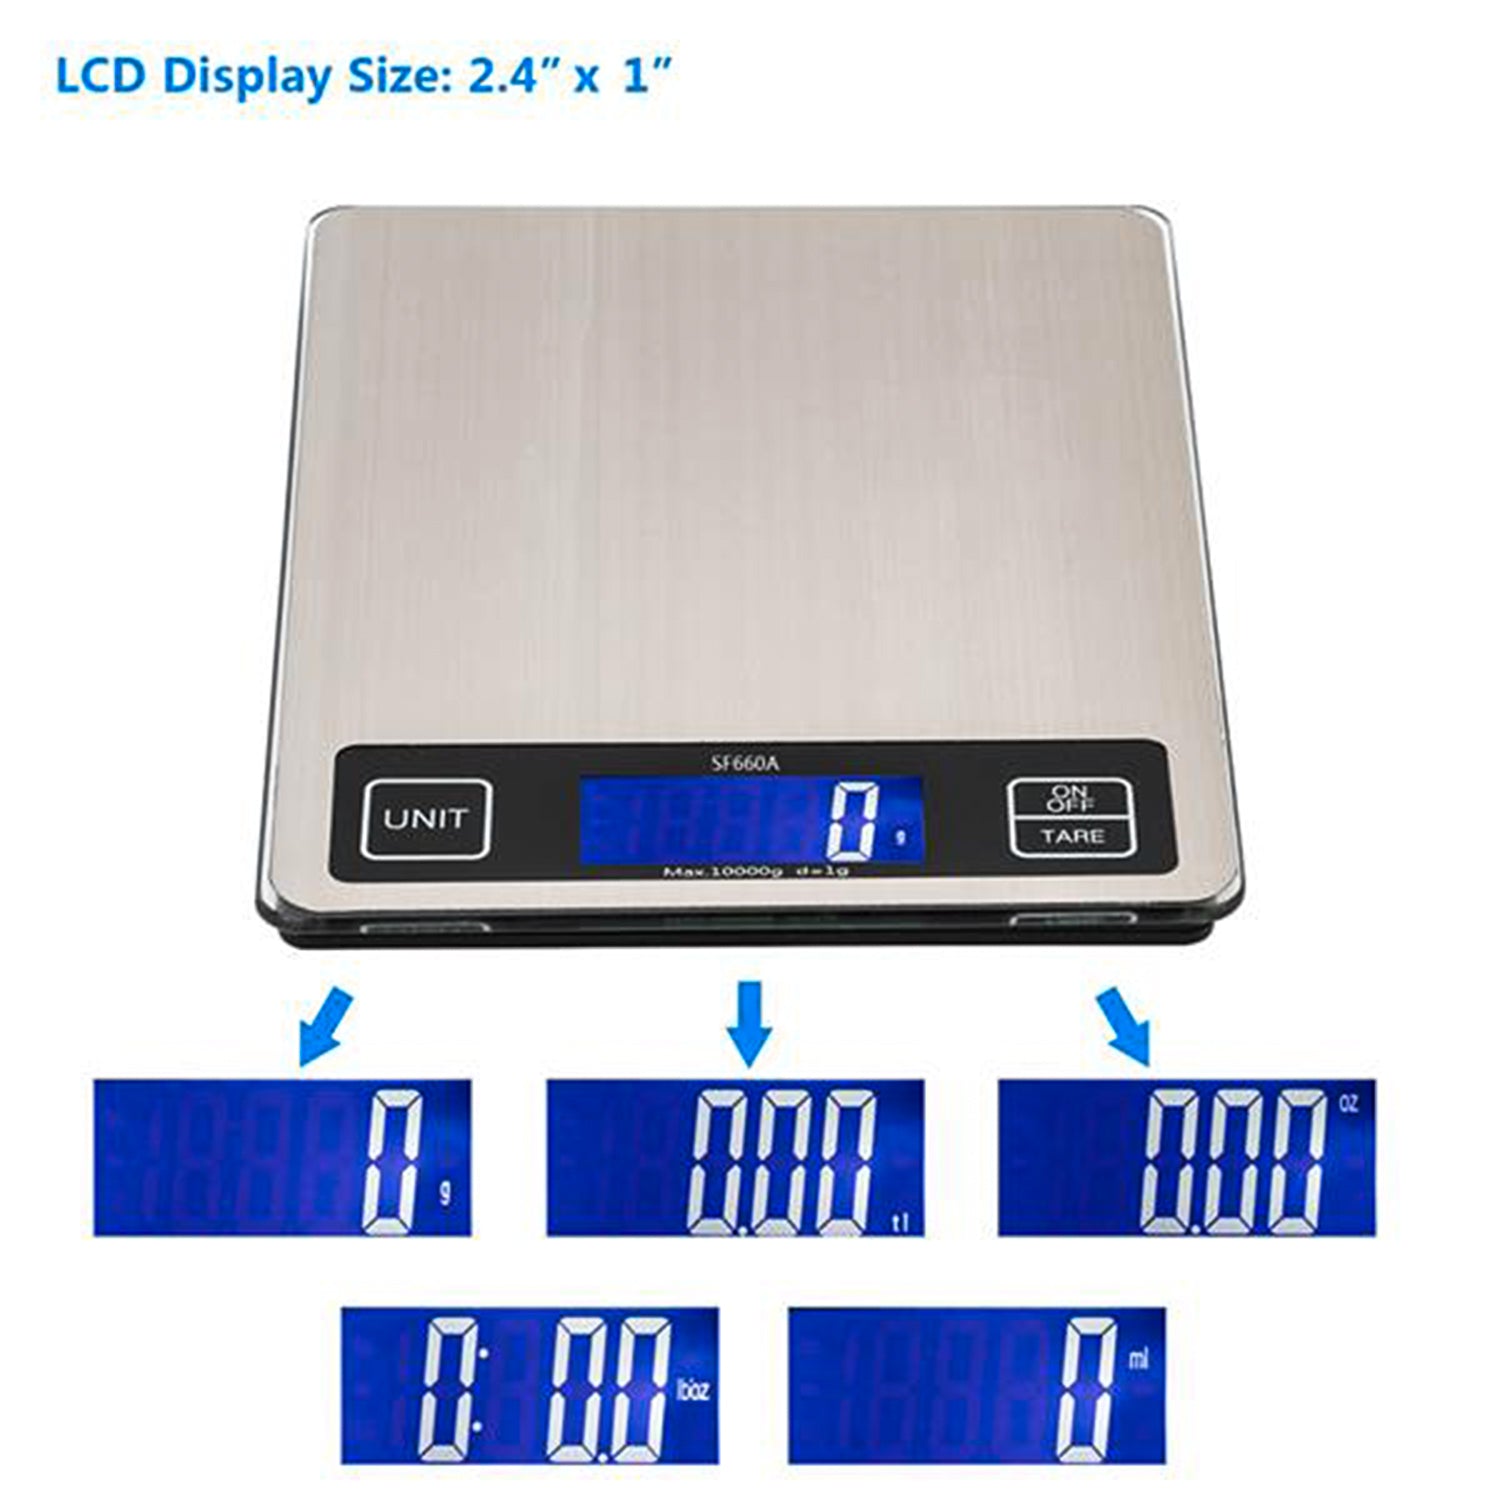 Food Scale 22lb Digital Kitchen Scale with 1g/0.05oz Precise Graduation, 5  Units LCD Display Scale for Cooking/Baking in KG, G, oz, ml, and lb, Easy  Clean Stainless Steel and Tempered Glass 